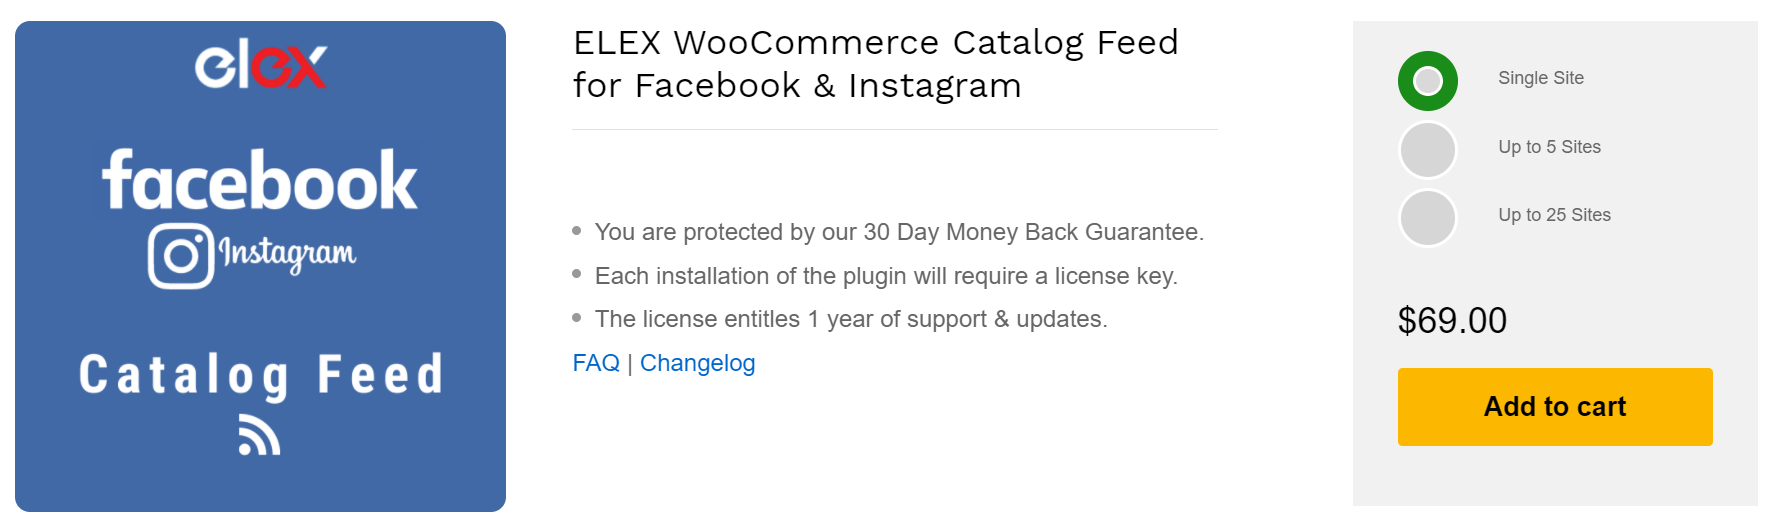 WooCommerce Catalog Feed Plugins for Facebook | ELEX WooCommerce Catalog Feed for Facebook & Instagram